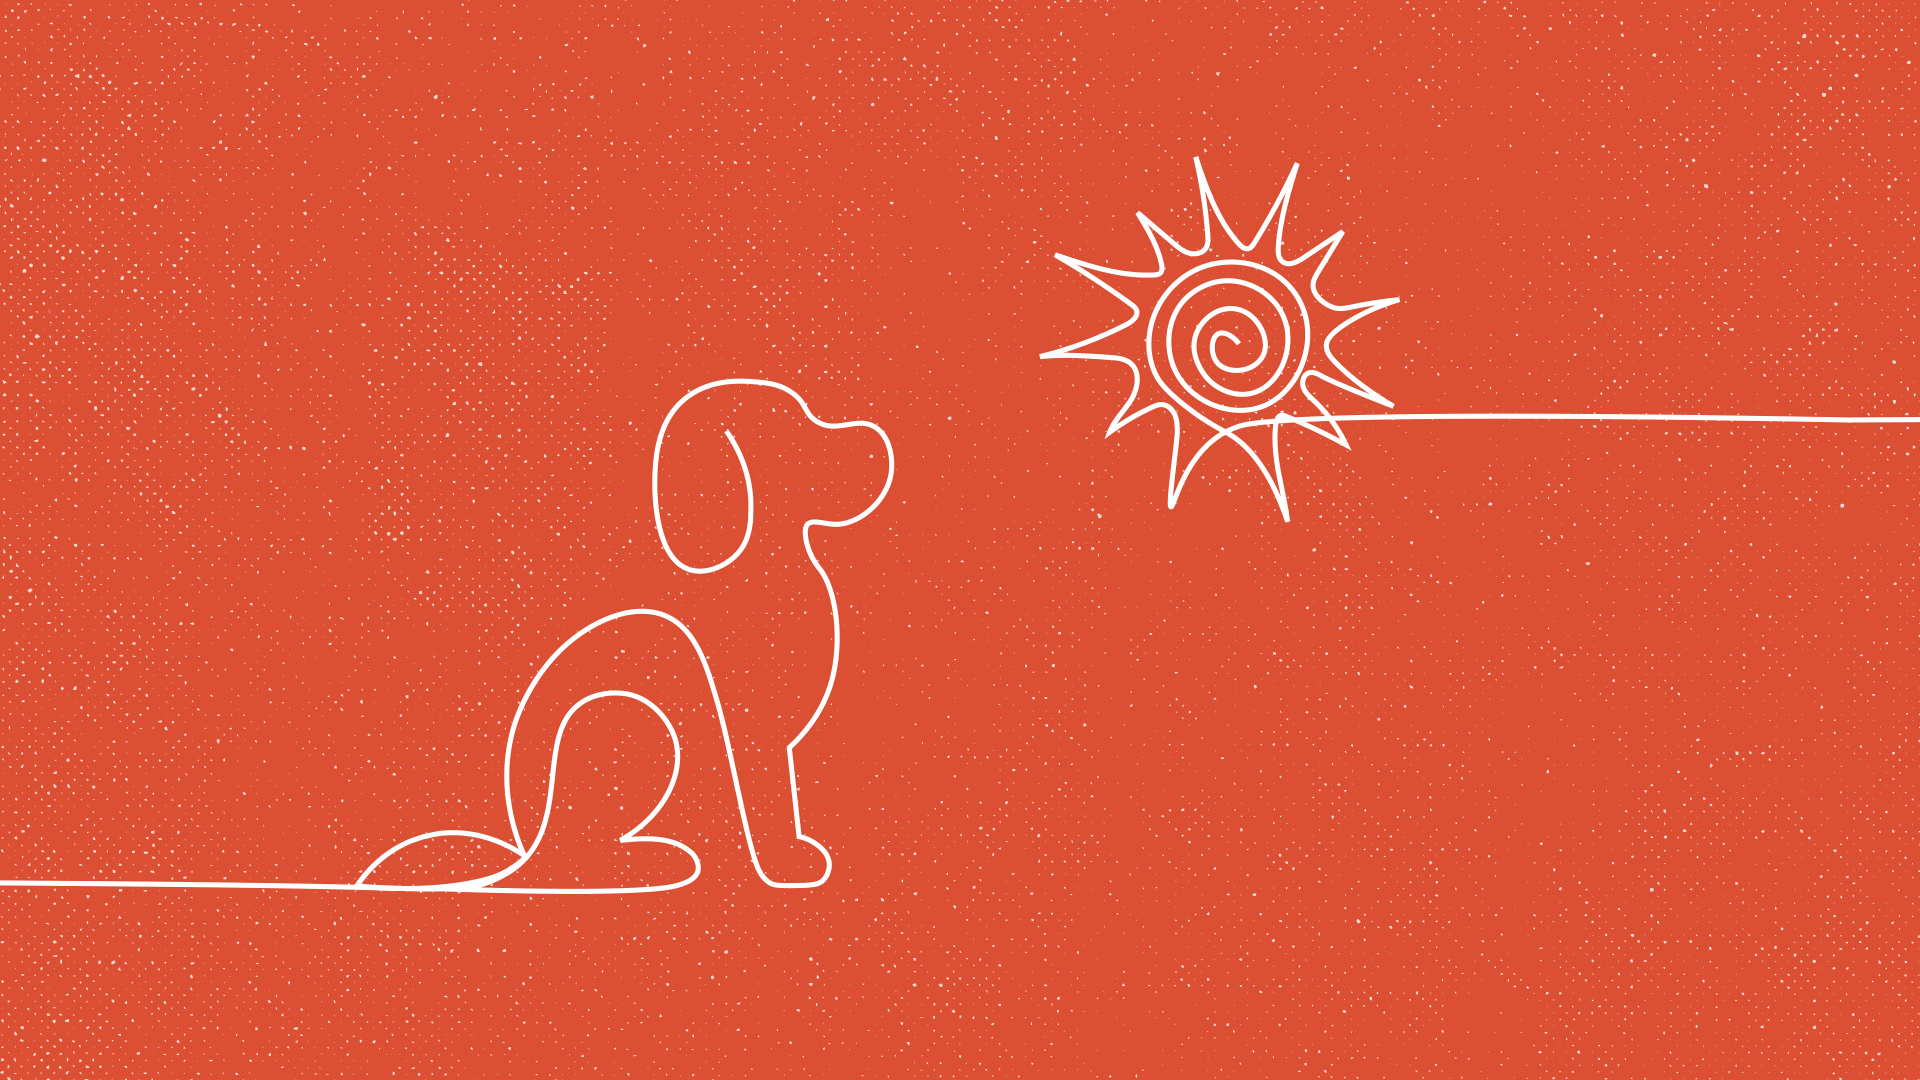 A GIF of a dog near the sun, with a wagging tail